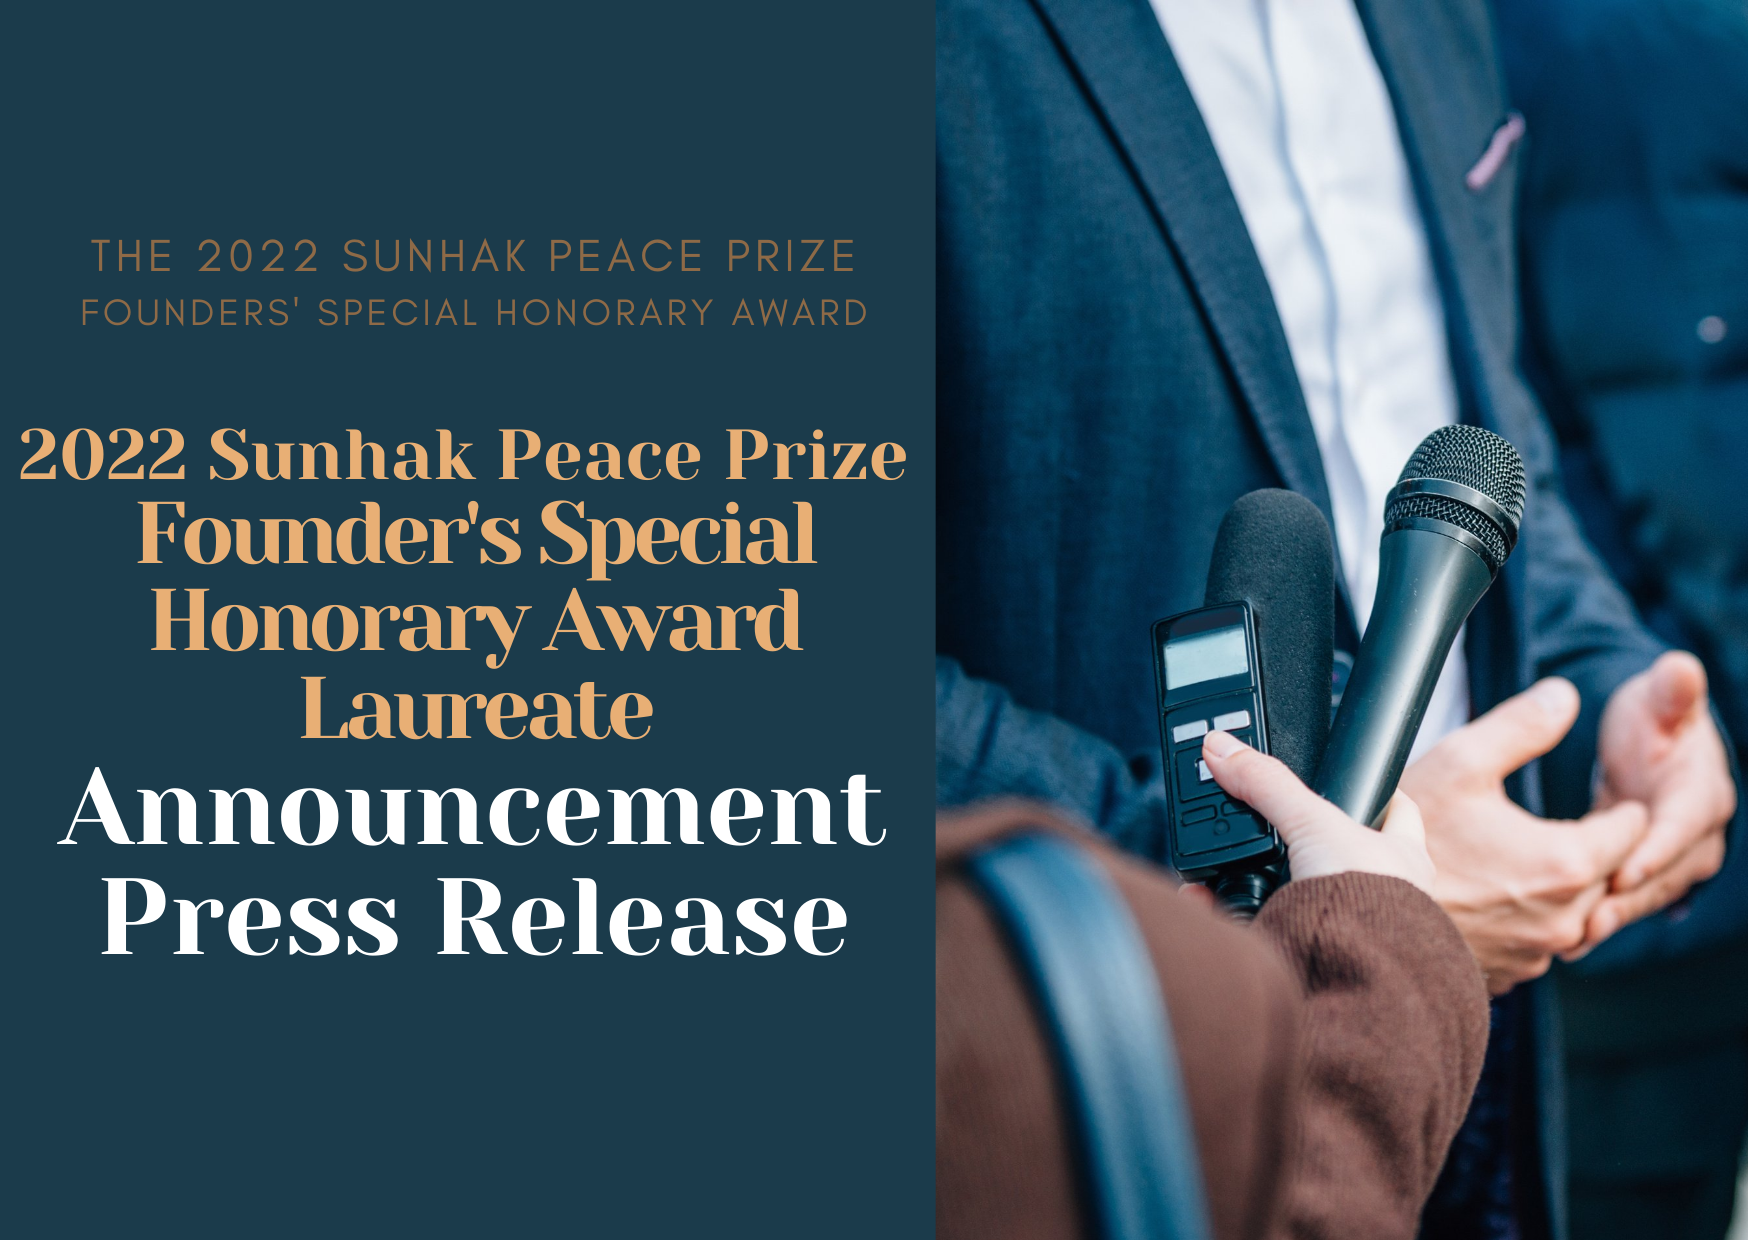 2022 Sunhak Peace Prize Founders' Special Honorary Award Laureates Announcement Press Release 이미지